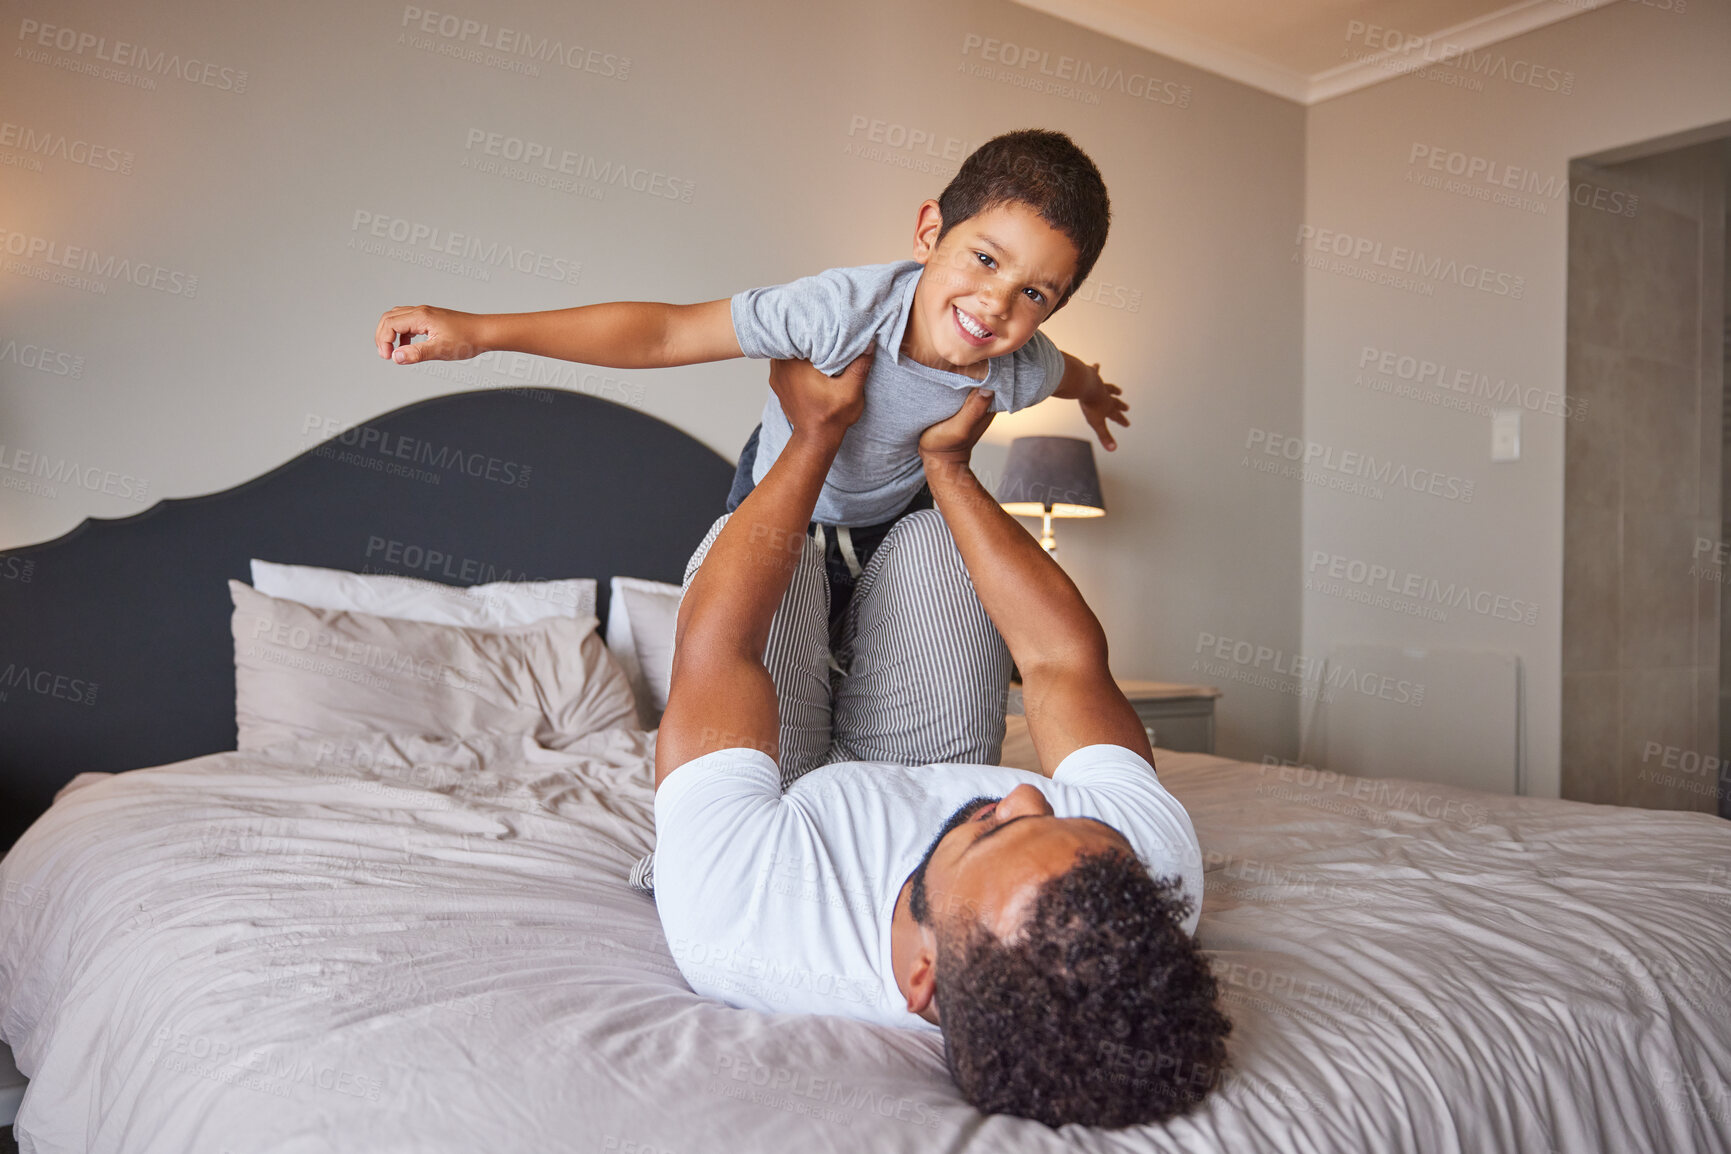 Buy stock photo Smile, love and happy father and son family time playing in bedroom bed lifting him like airplane or superhero. Loving dad, man or single parent bonding with cheerful kid in the morning at home.